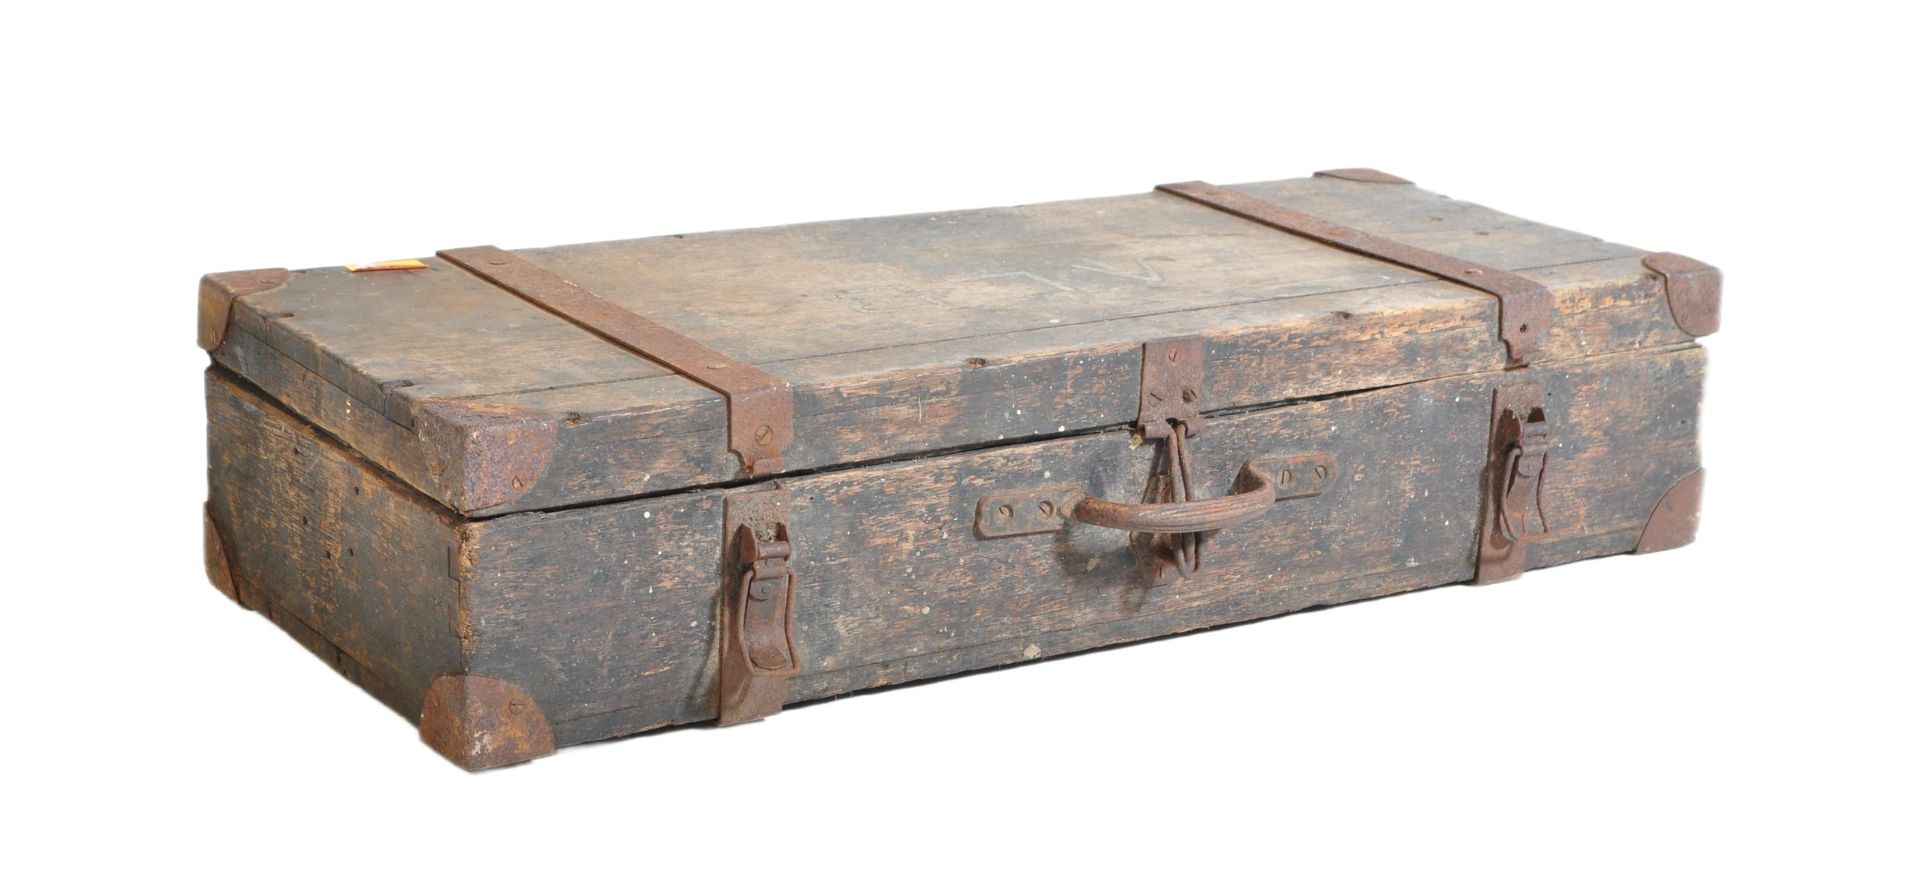 EARLY 20TH CENTURY WOODEN AMMUNITION CASE